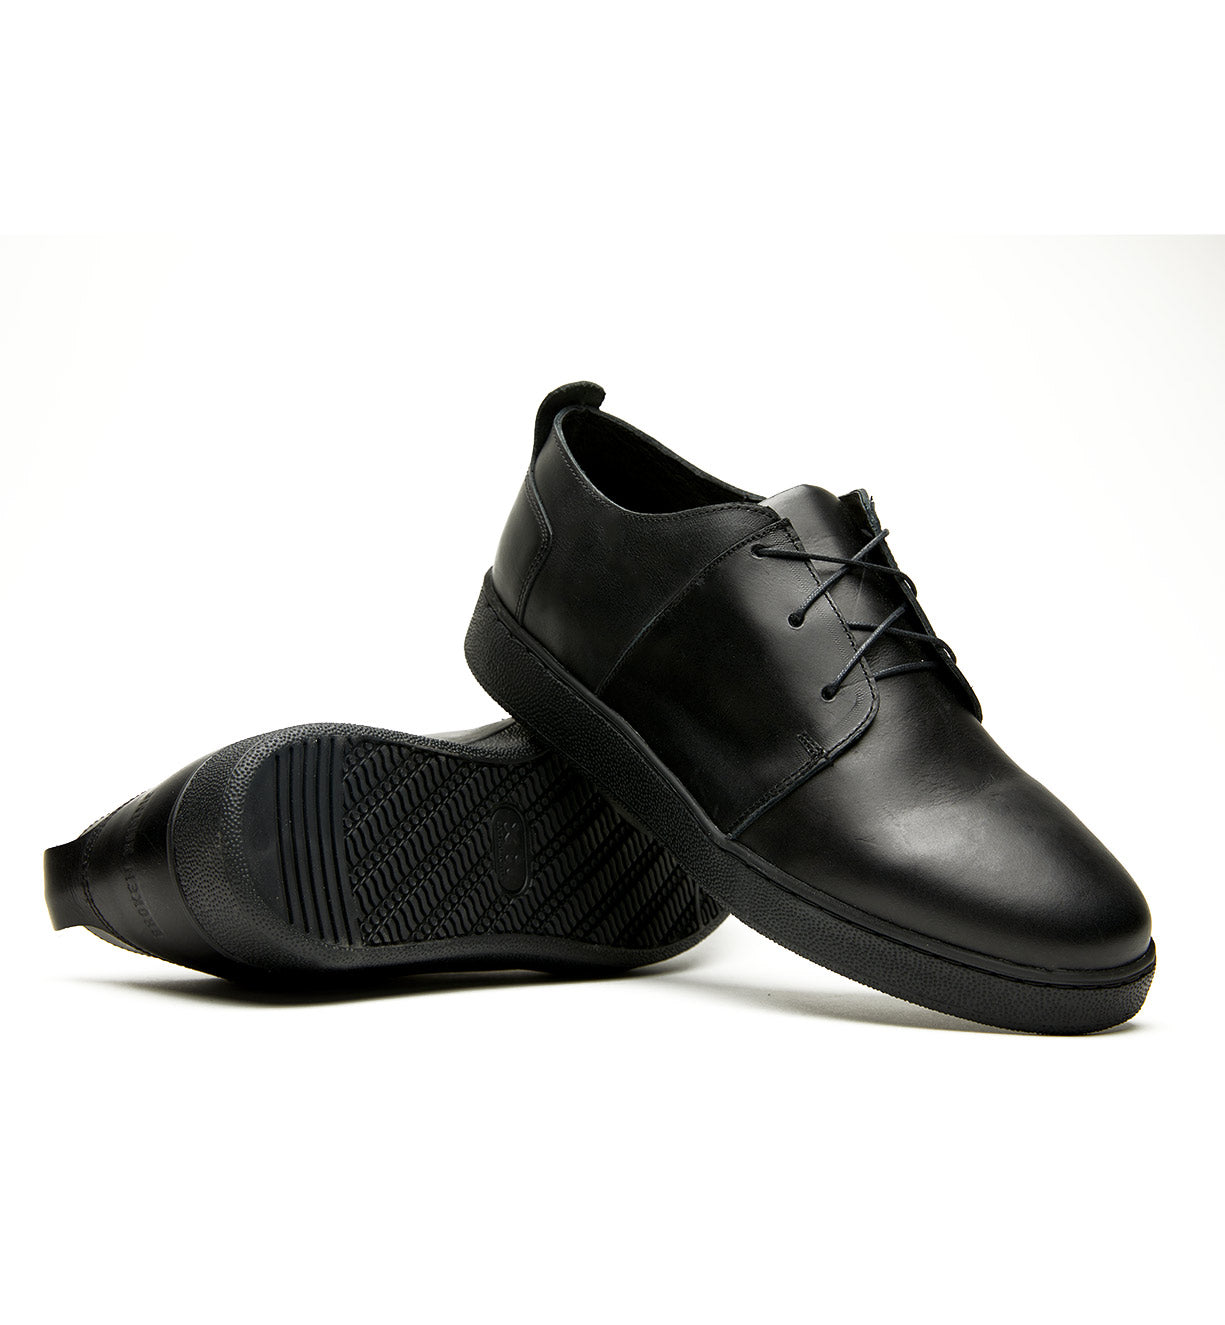 A pair of Broken Homme Ben Low black leather sneakers with a cork filled midsole on a white background.